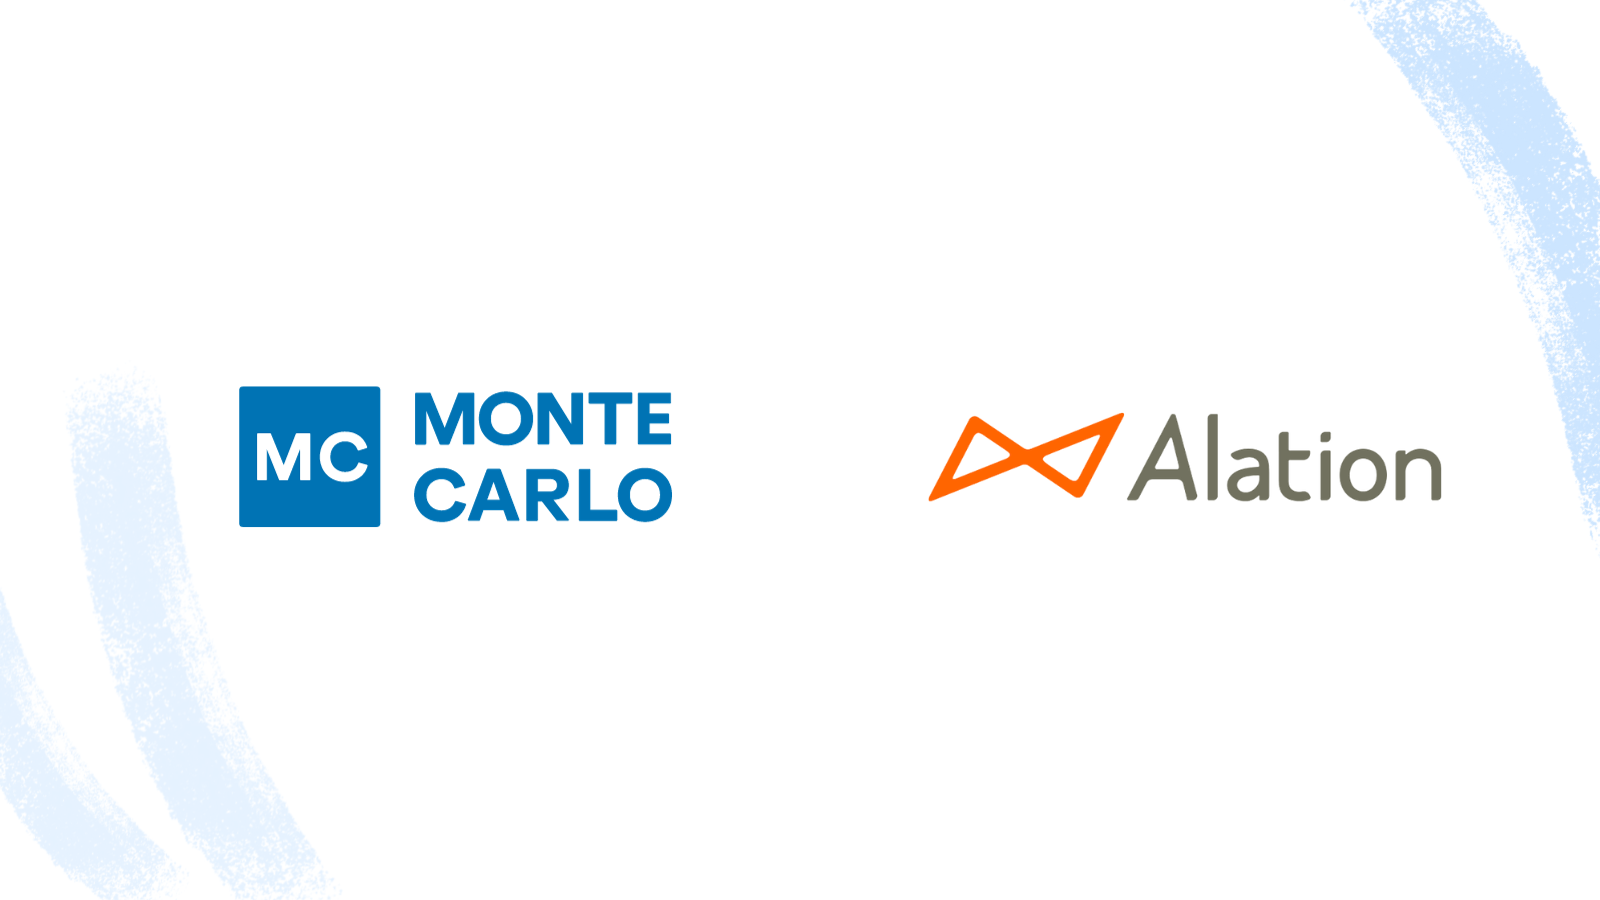 Monte Carlo Launches New Partnership and Integration with Alation to Drive Data Trust Across the Enterprise 